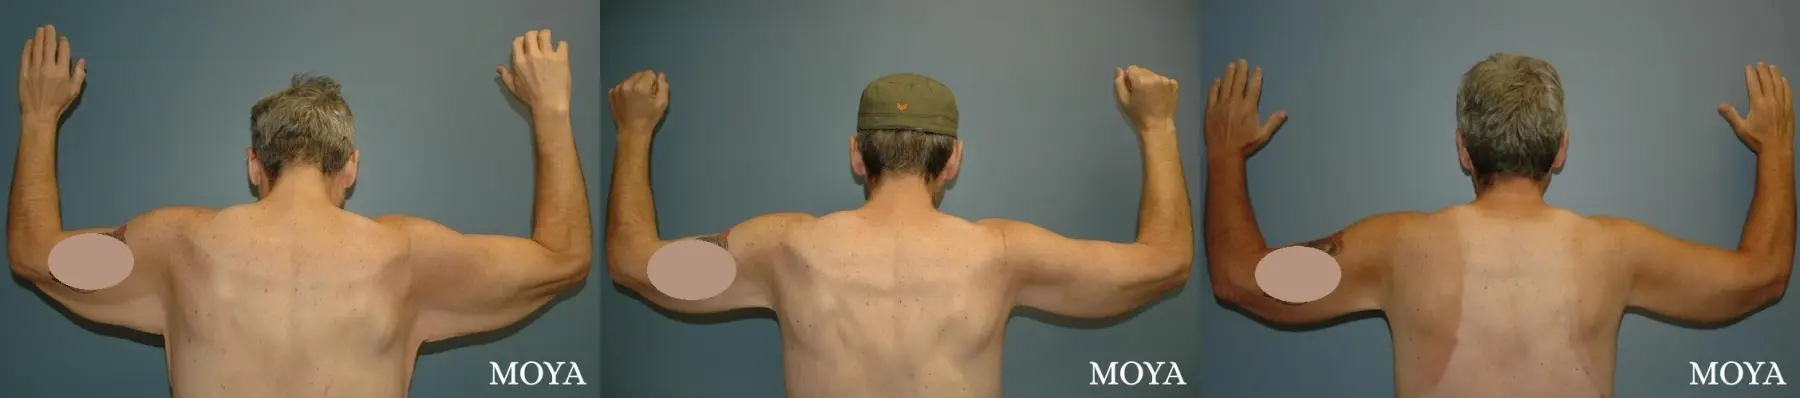 Arm Lift (major: medial incision) - Before and After 2